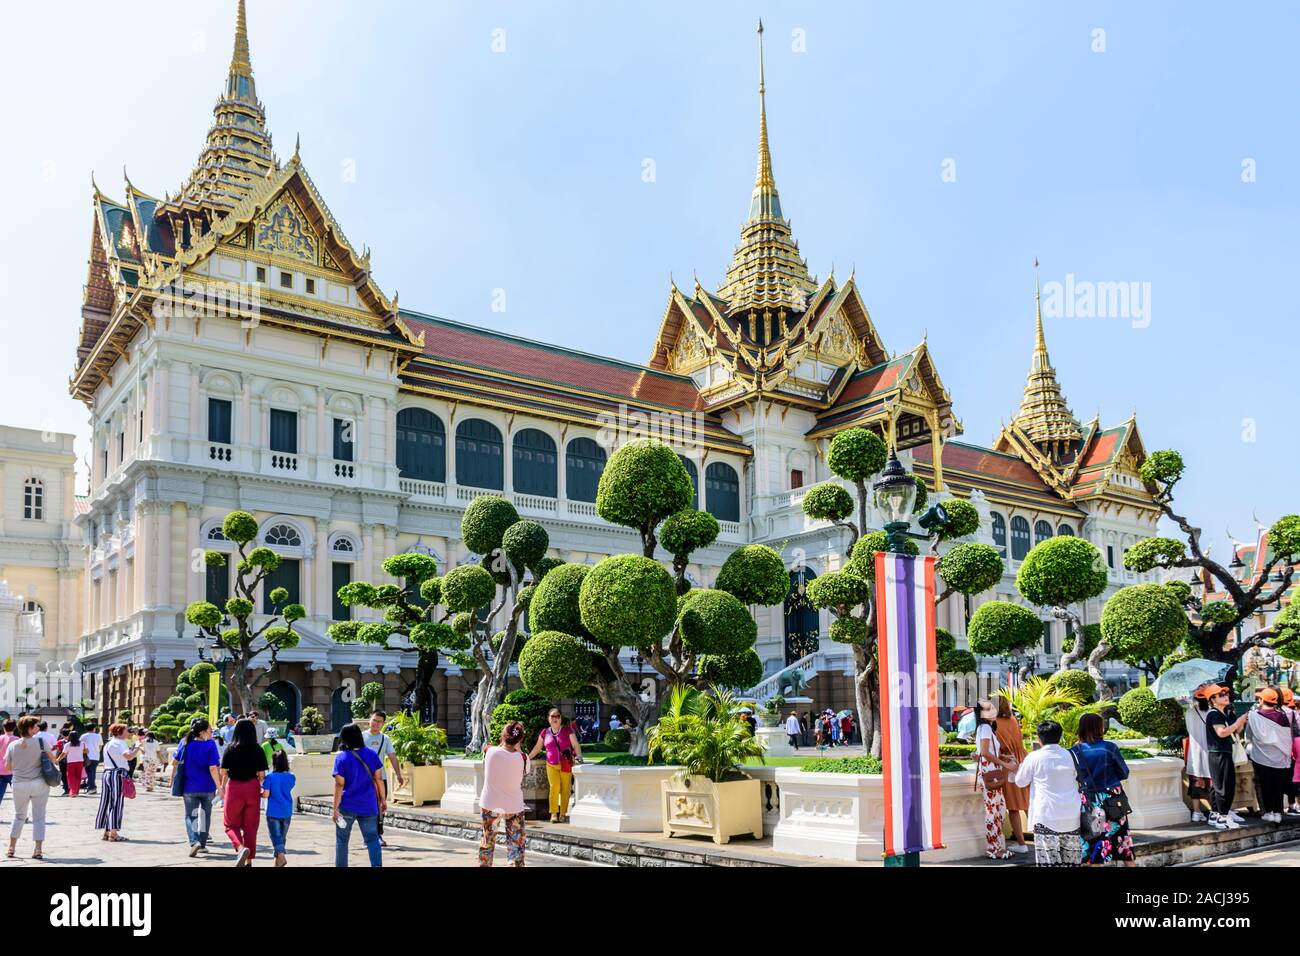 Bangkok, Thailand - November 17, 2019: Tourists at the Grand Palace a famous tourist destination with the Temple of the Emerald Buddha. Stock Photo